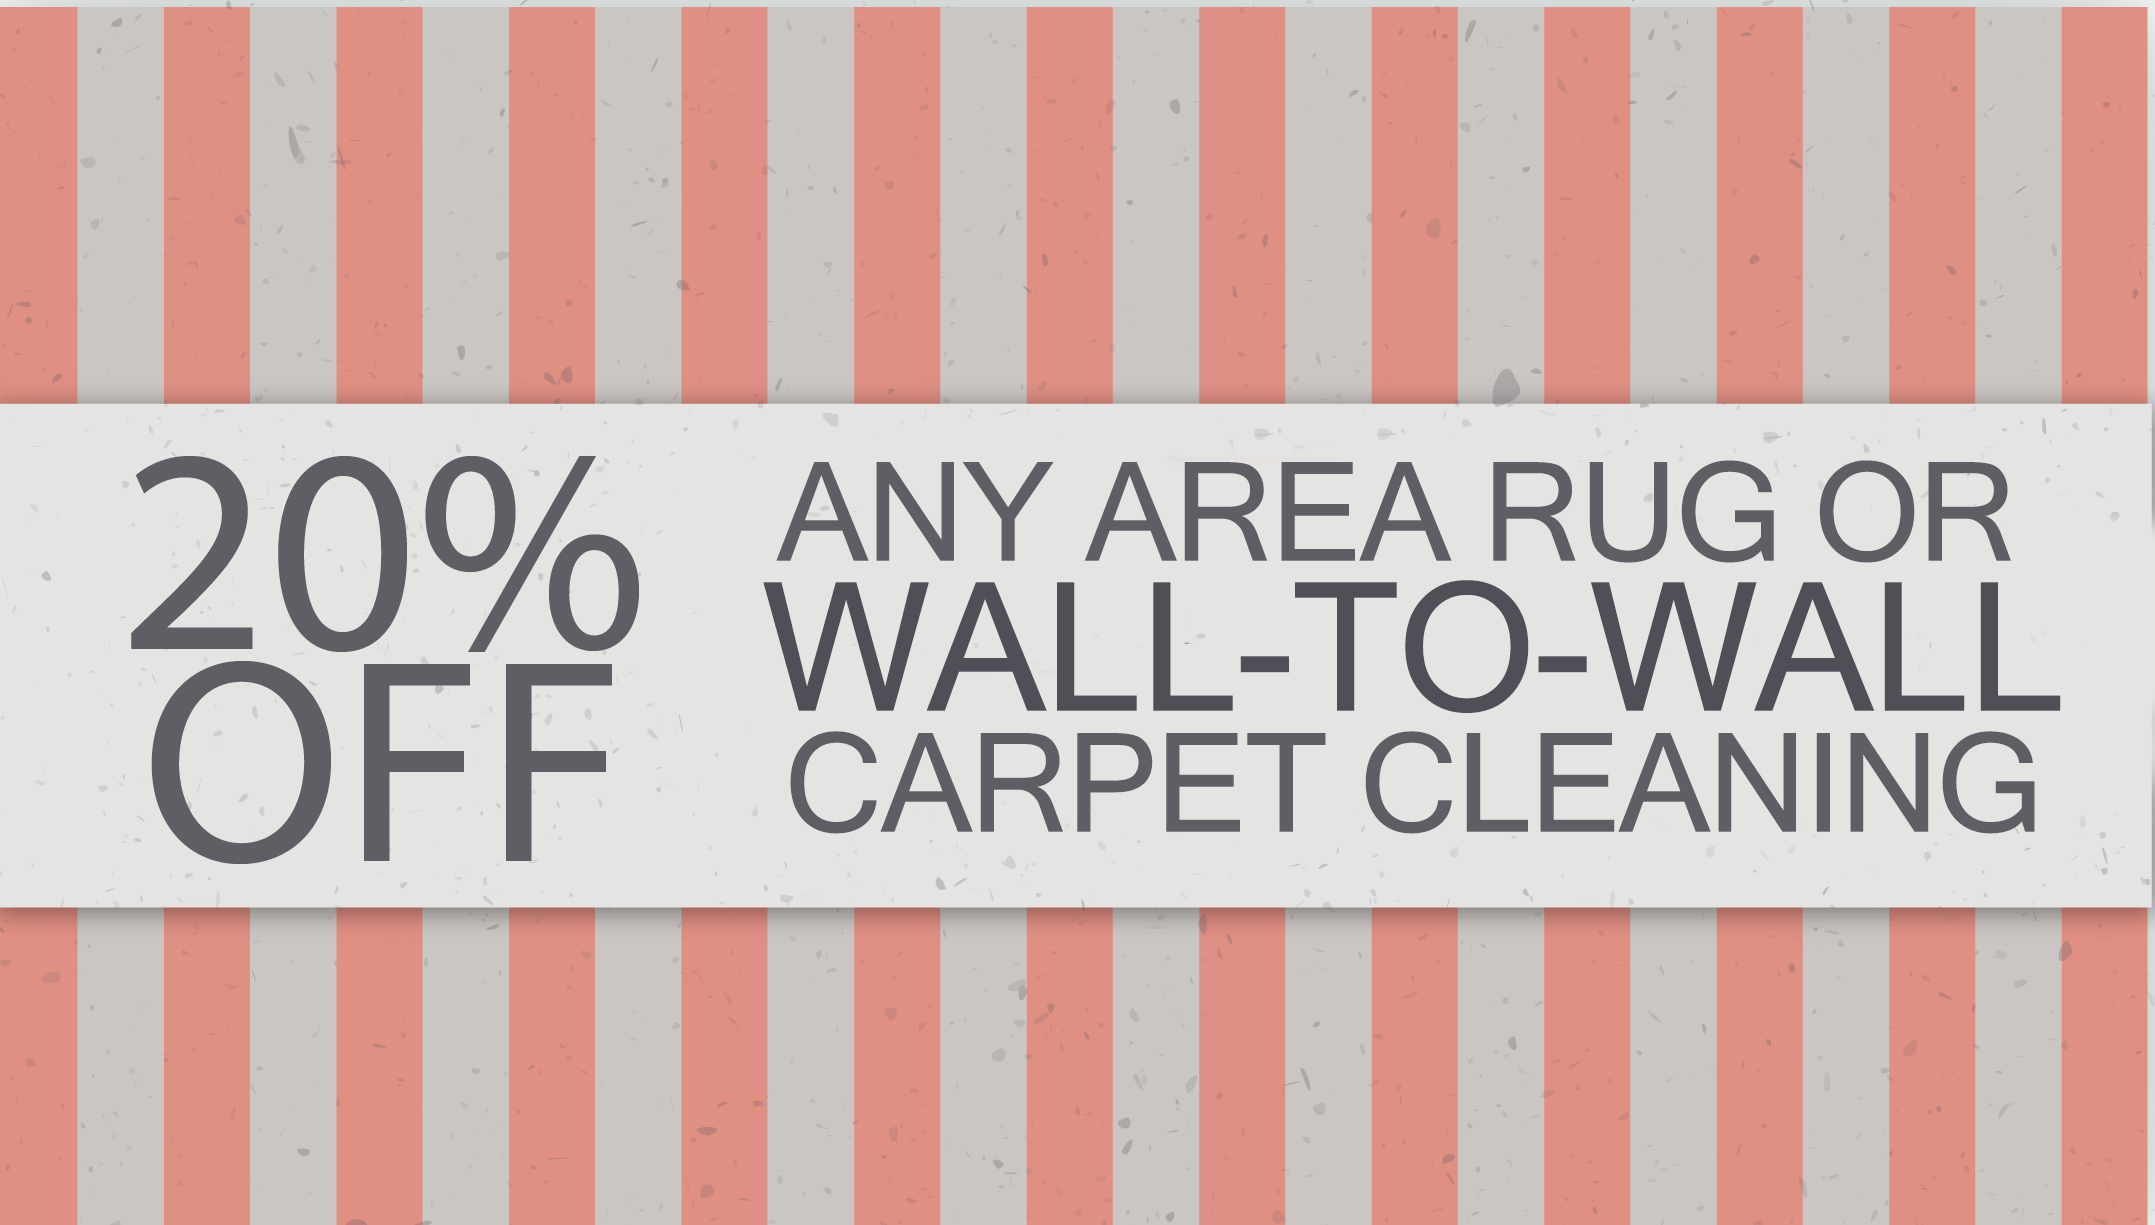 20 OFF ANY AREA RUG OR WALL2WALL CARPET CLEANING